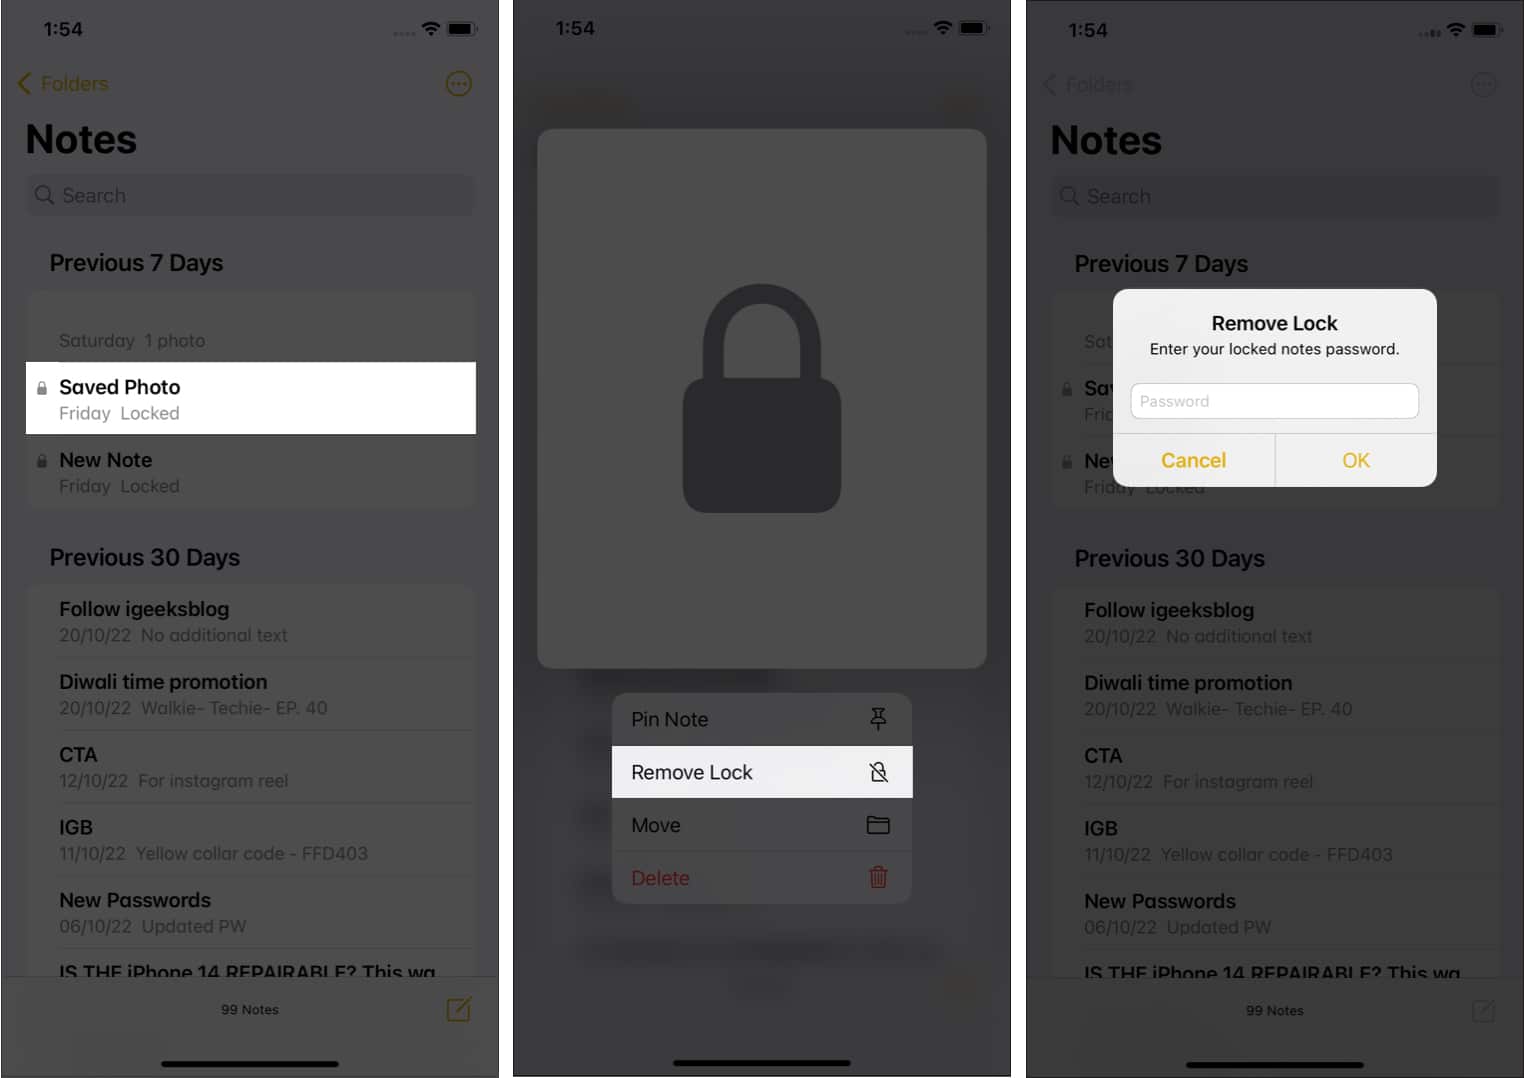 How to Remove a Lock from a Note on iPhone